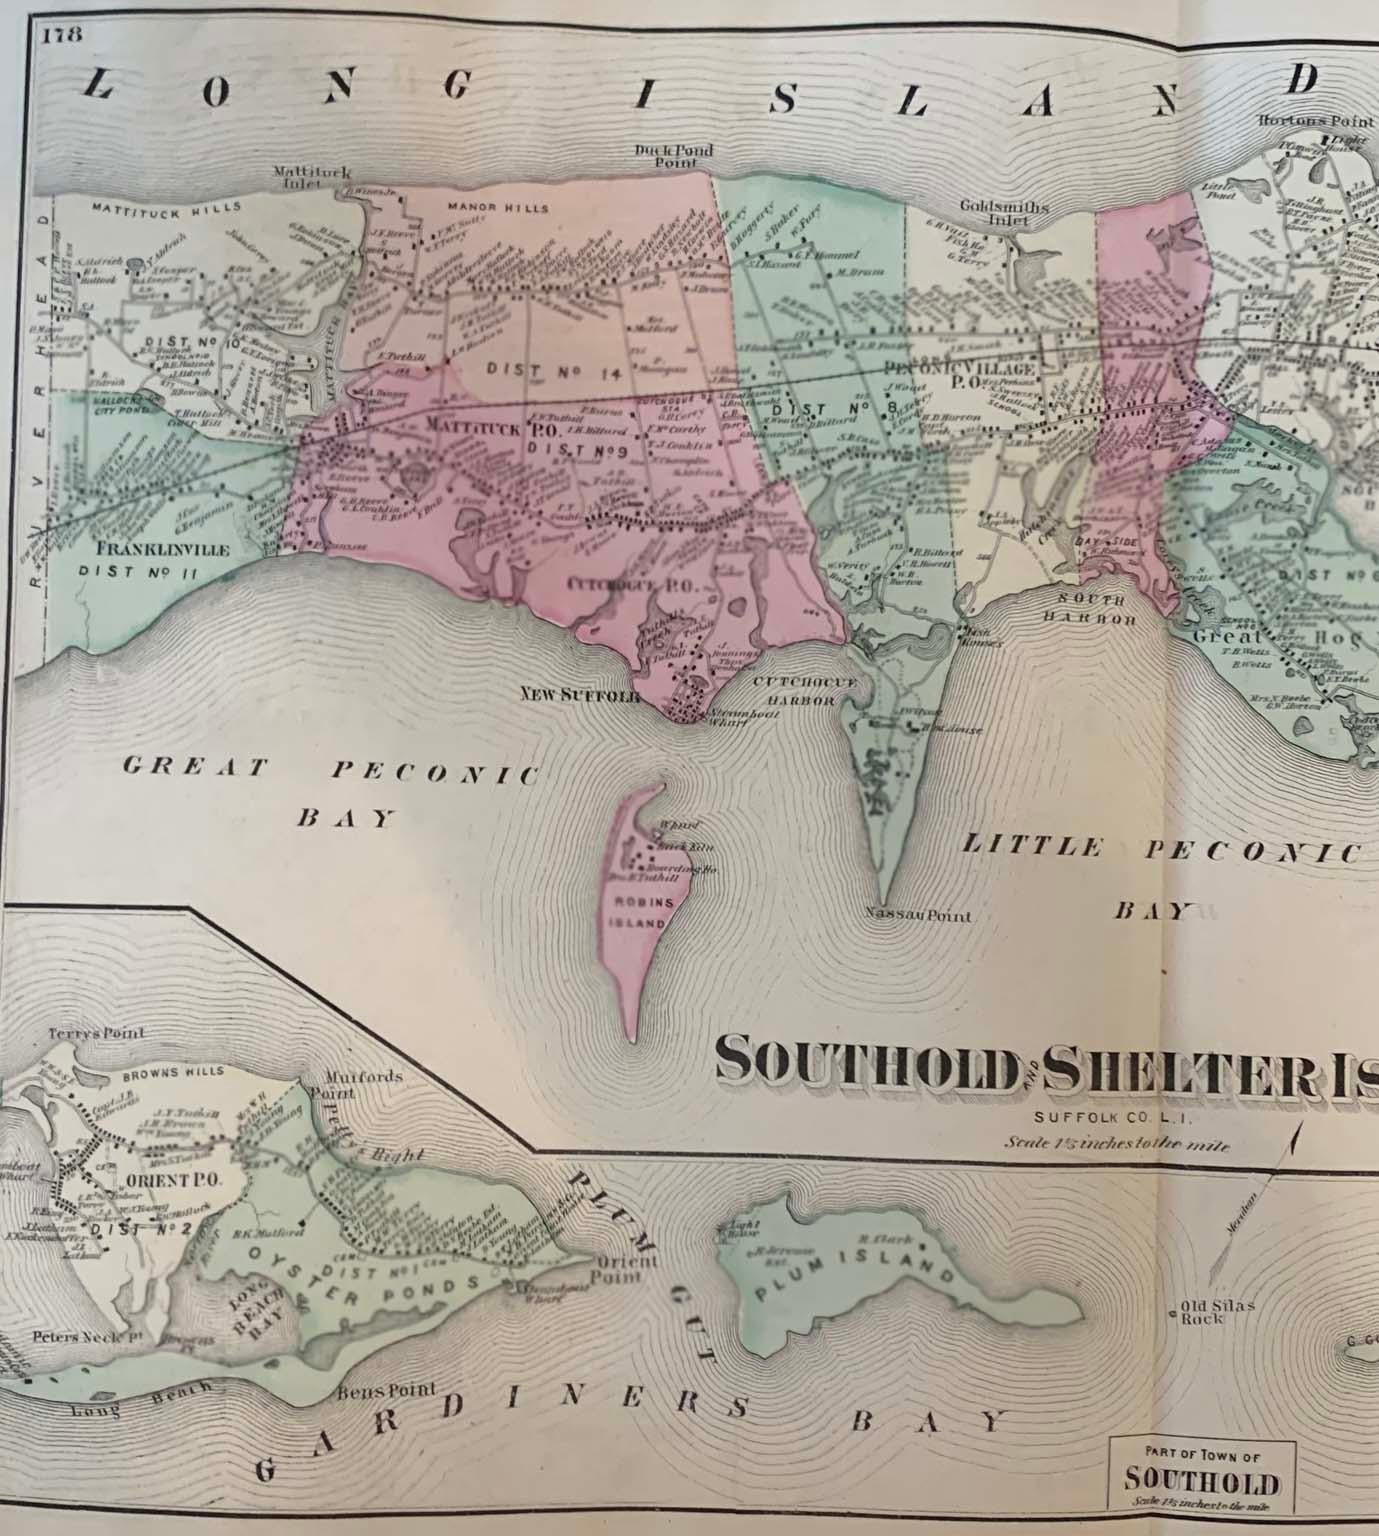 Antique map of Long Island, Southold, Shelter Island, Orient, Great details, Names of homes, Roads and Businesses in 1870. Unframed. This is an original map, not a repro.